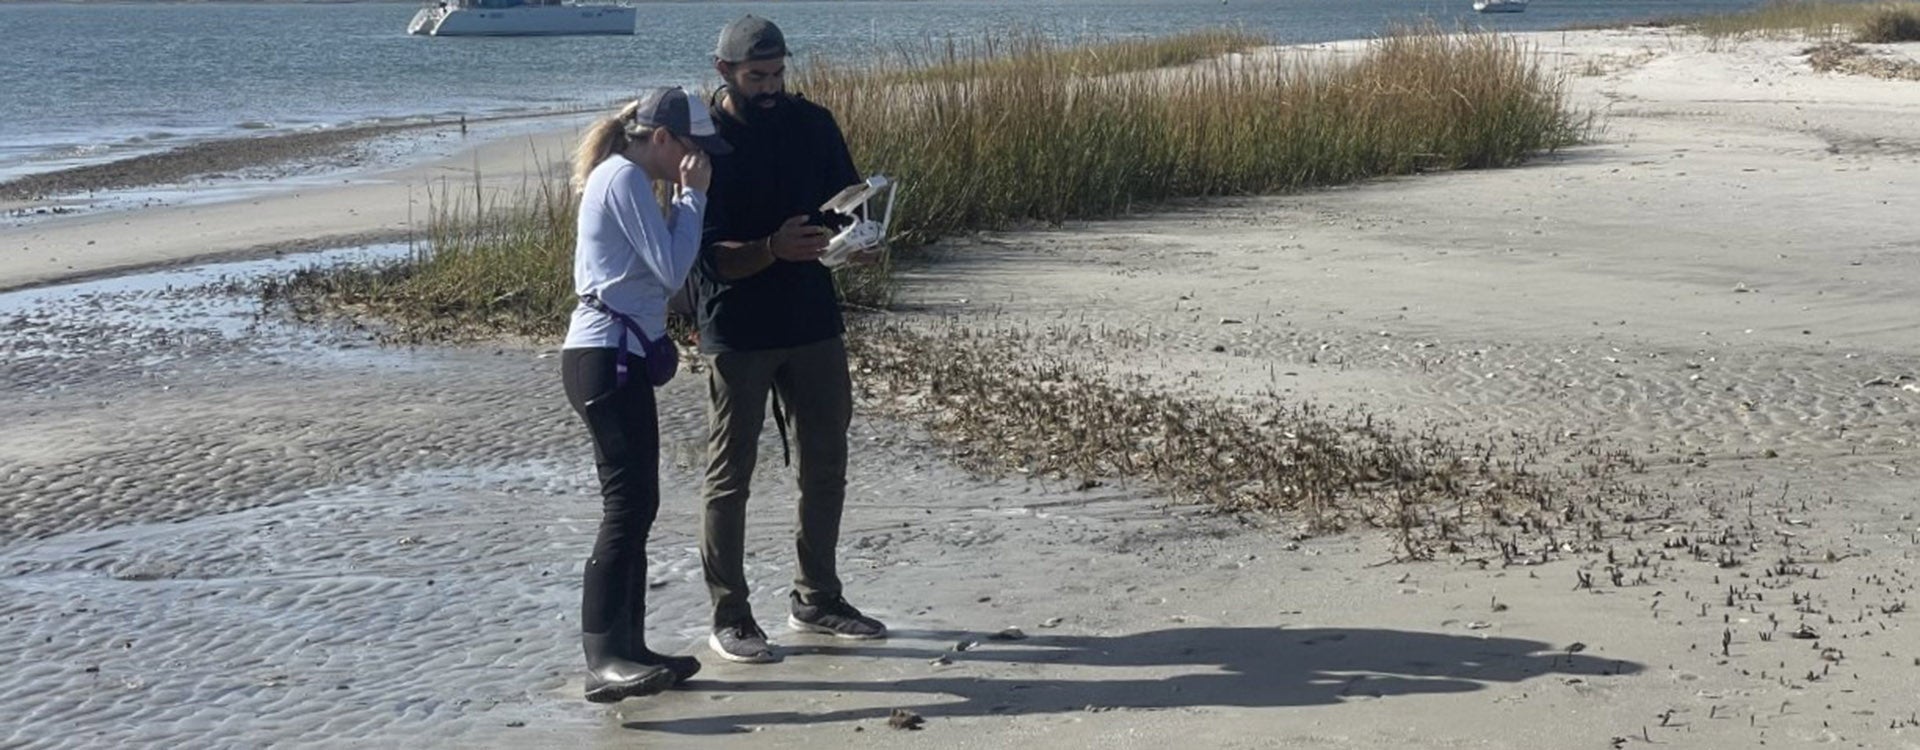 Dr. Hannah Sirianni, left, reviews the automatic flight parameters with Moody before he conducts a scientific drone survey of Sugarloaf Island. 